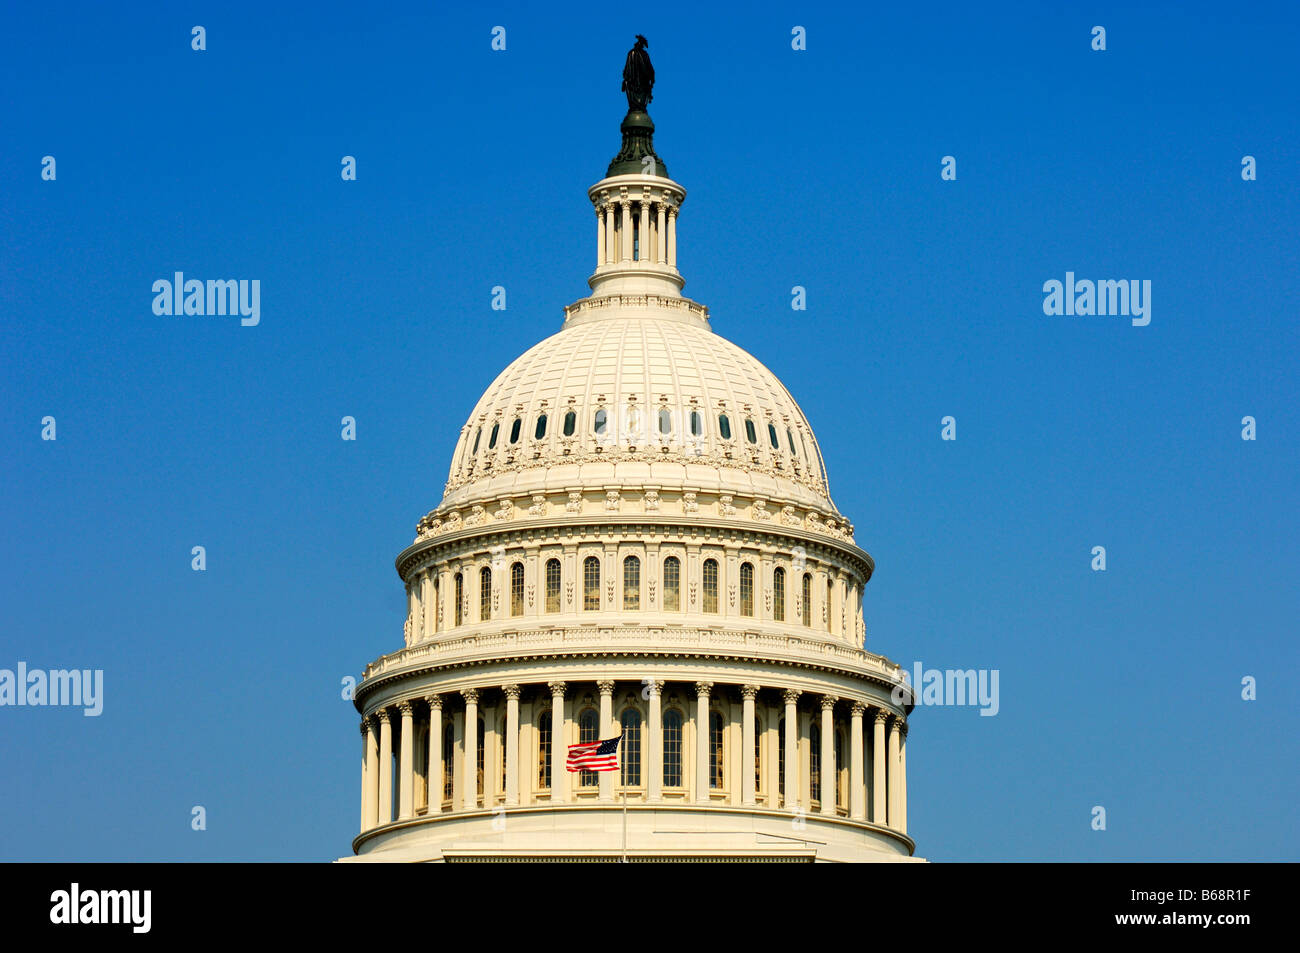 Central dome of the United States Capitol, Washington, DC., USA Stock Photo